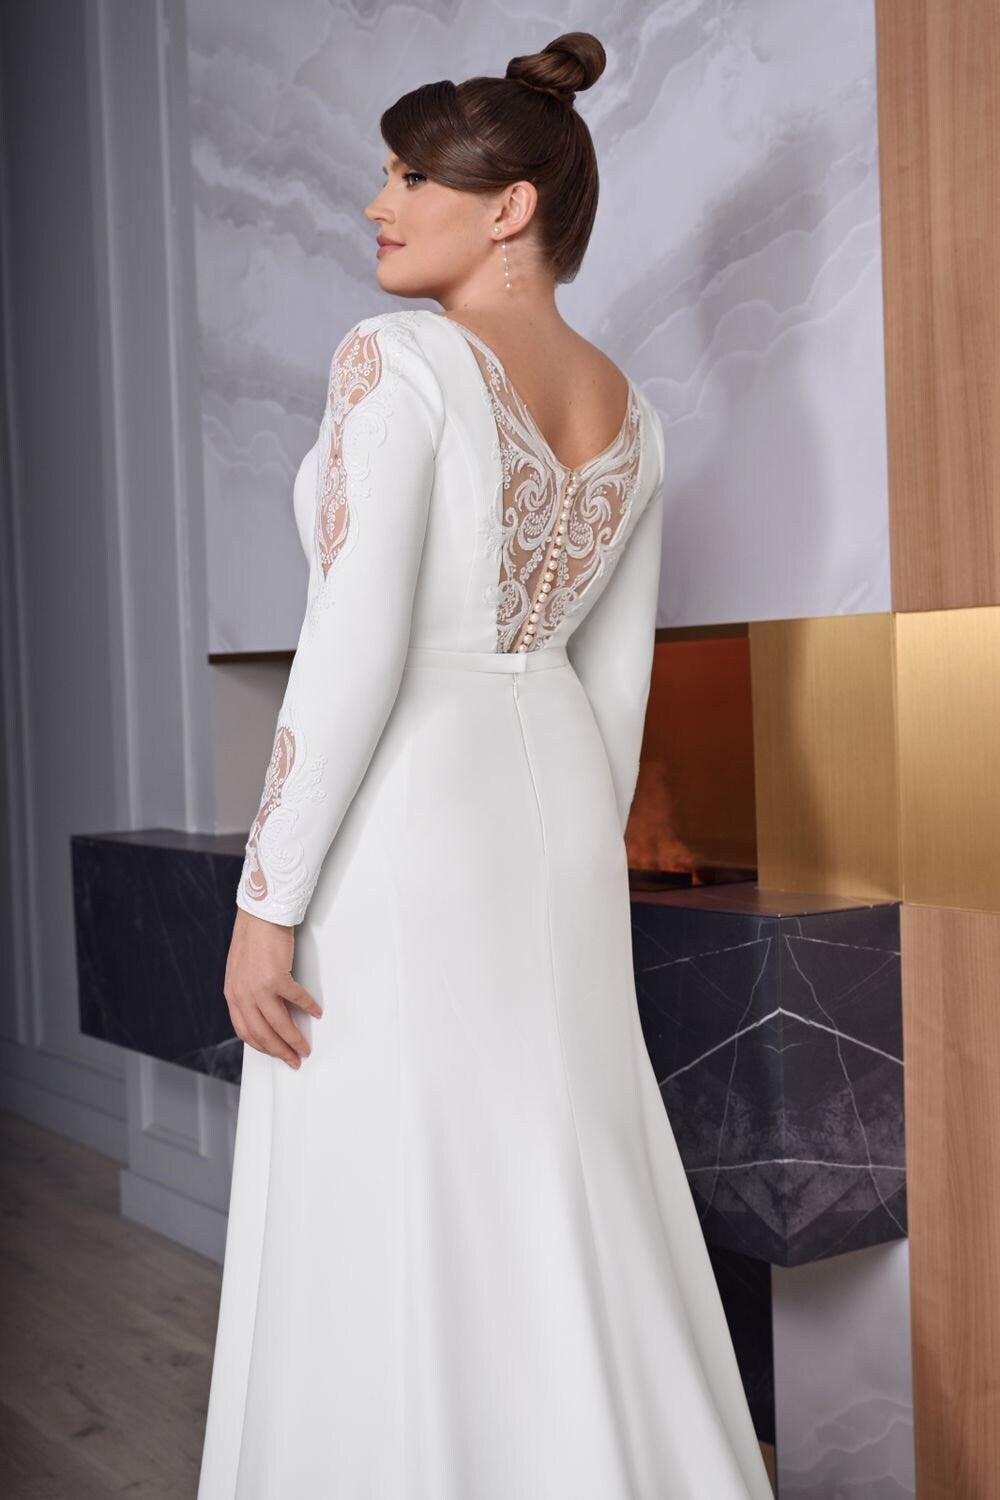 Stunning Fitted Fit and Flare Long Sleeve Modest Boat Neckline Lace Cutouts Wedding Dress Bridal Gown Illusion Lace Back with Train Crepe